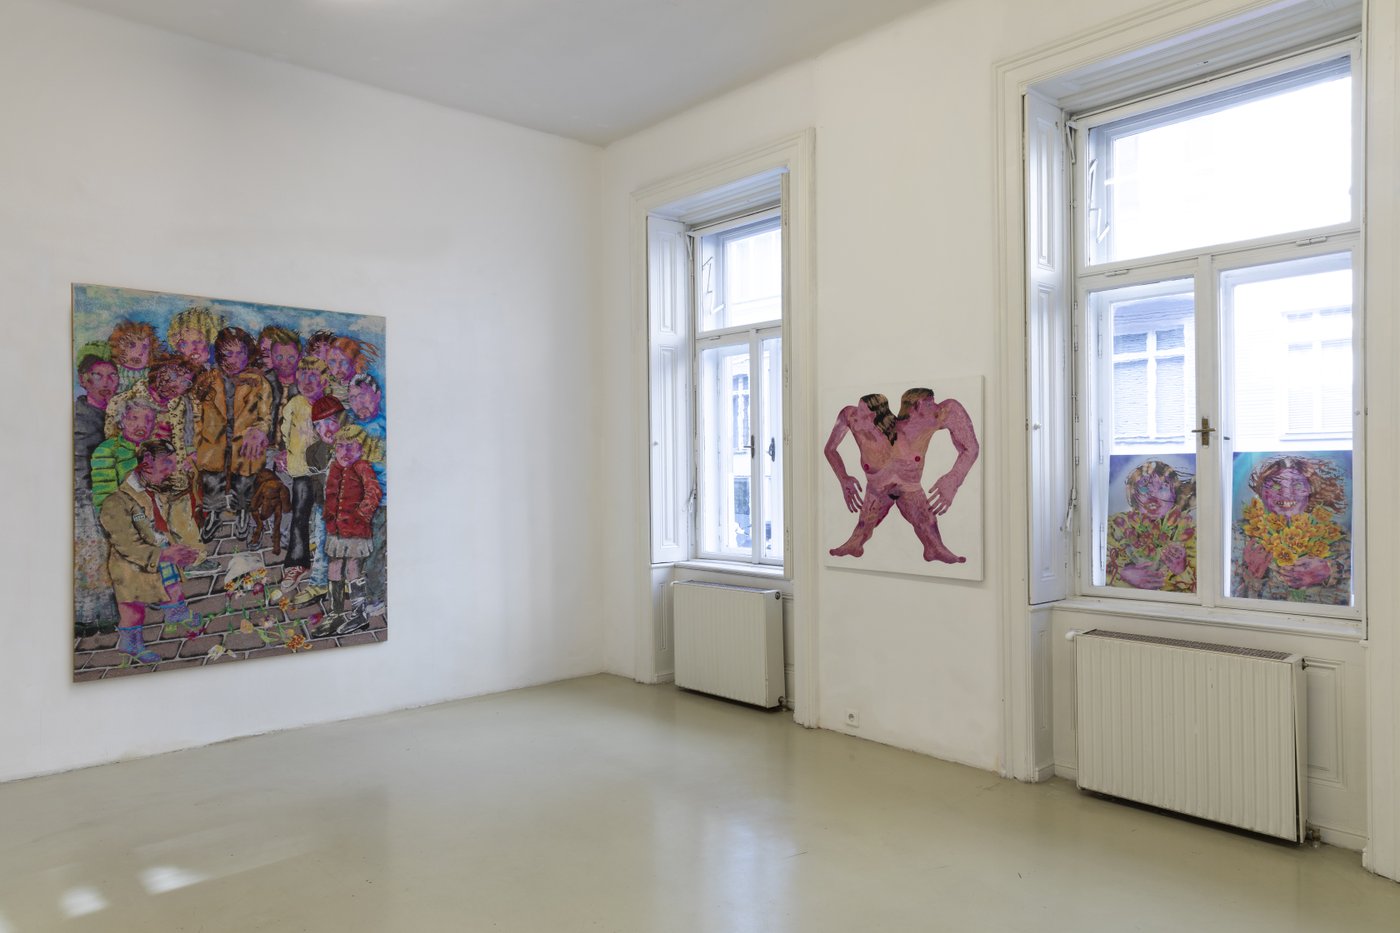 exhibition view with a painting and sculpture in front a window